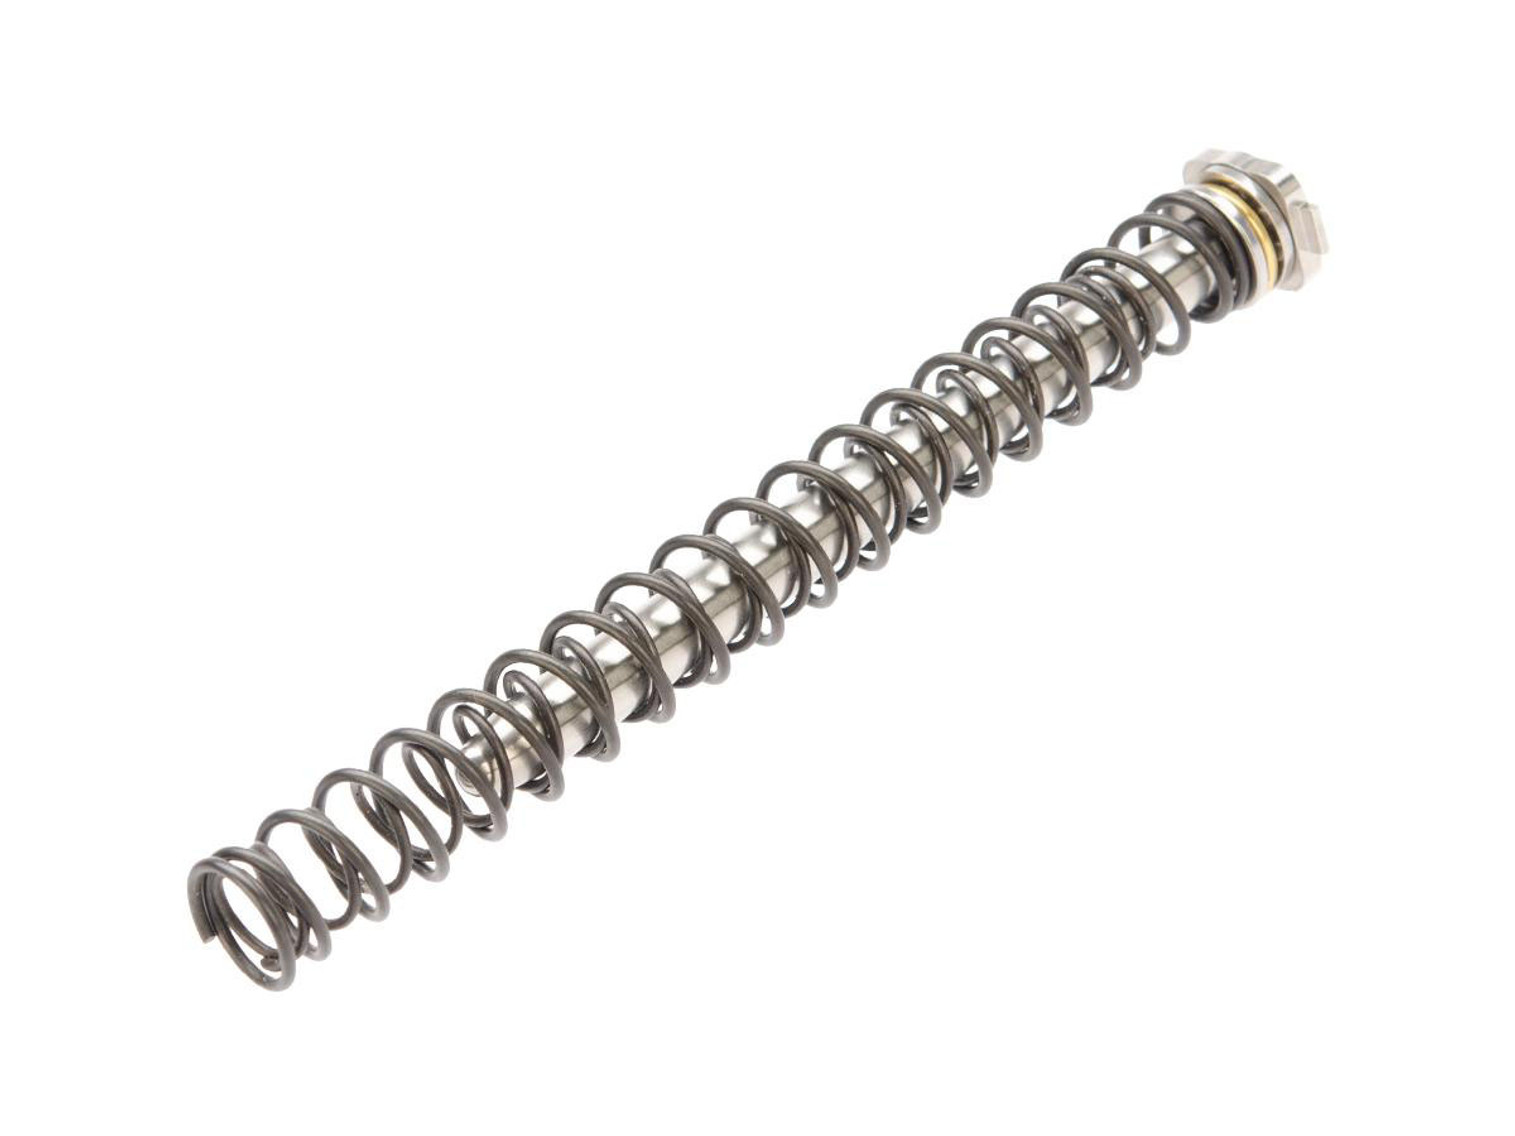 Angel Custom CNC Steel Ball Bearing Spring Guide w/ 130% and M120 Springs for Spring Powered Tri-Shot Airsoft Shotguns